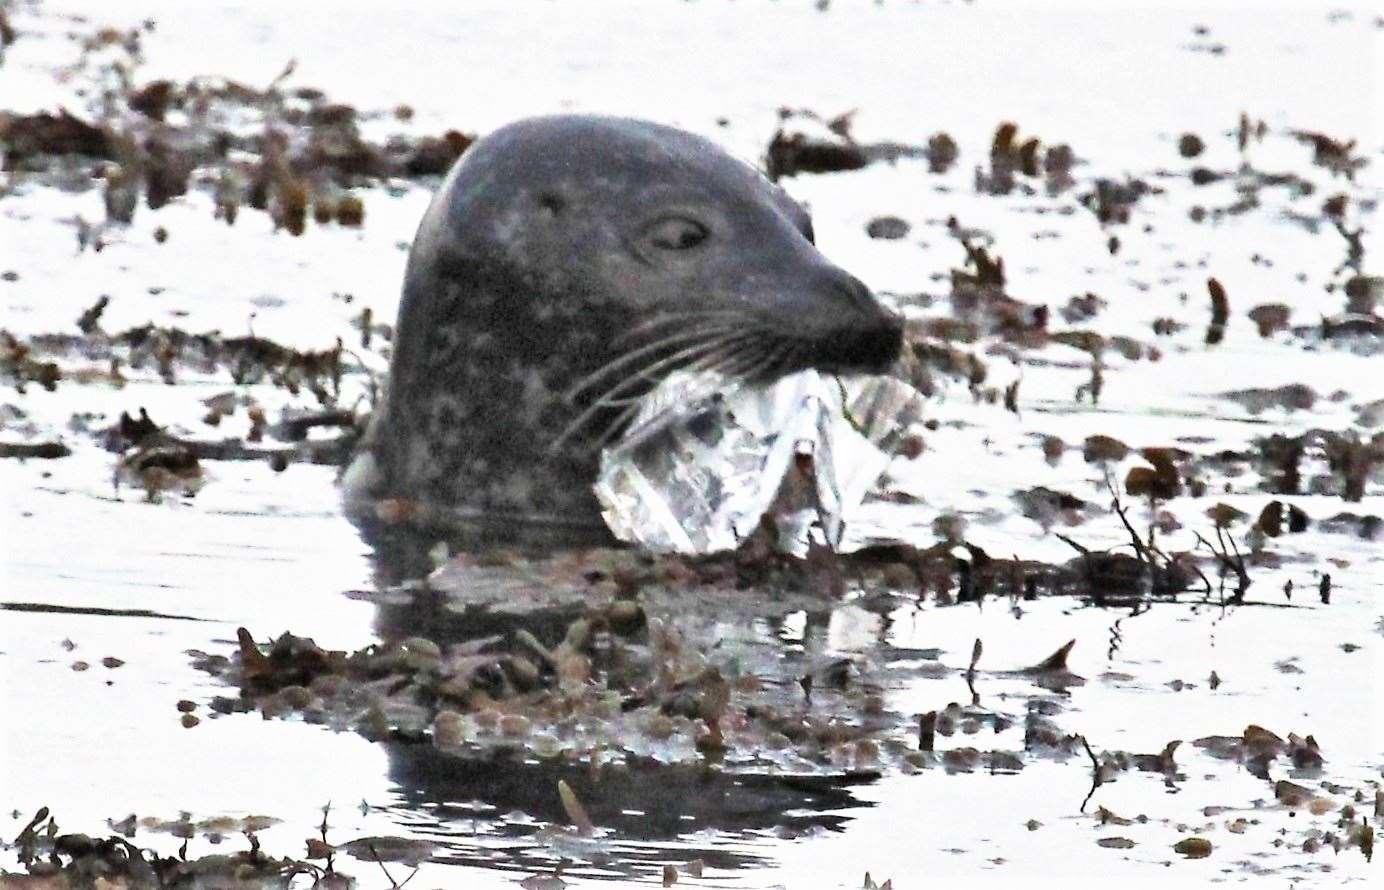 The seal was seen playing with an empty crisp packet at Harrow harbour near the Castle of Mey. Pictures: Valerie Clark